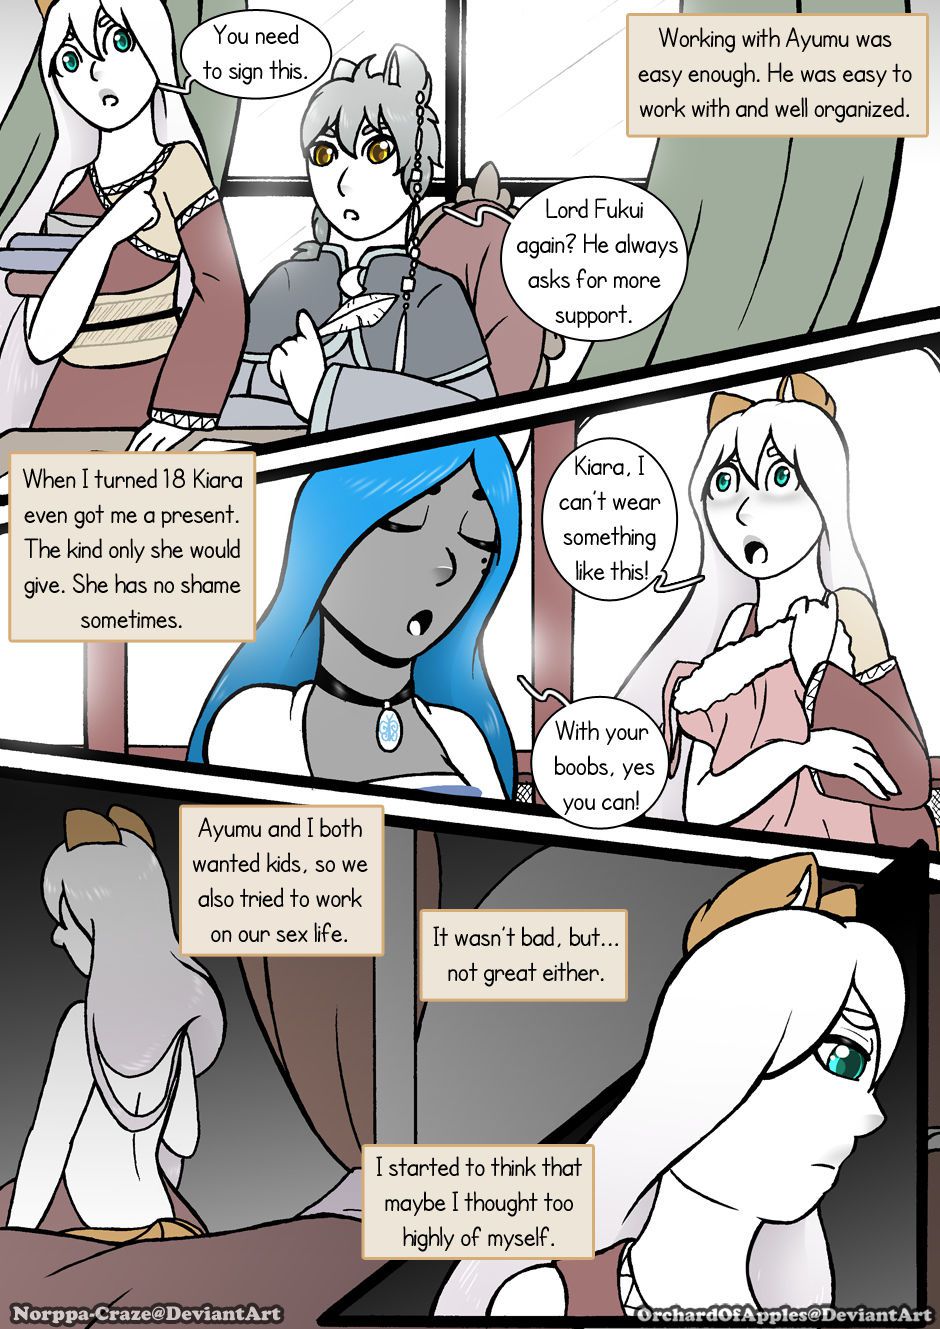 [Jeny-jen94] Between Kings and Queens [Ongoing] 300